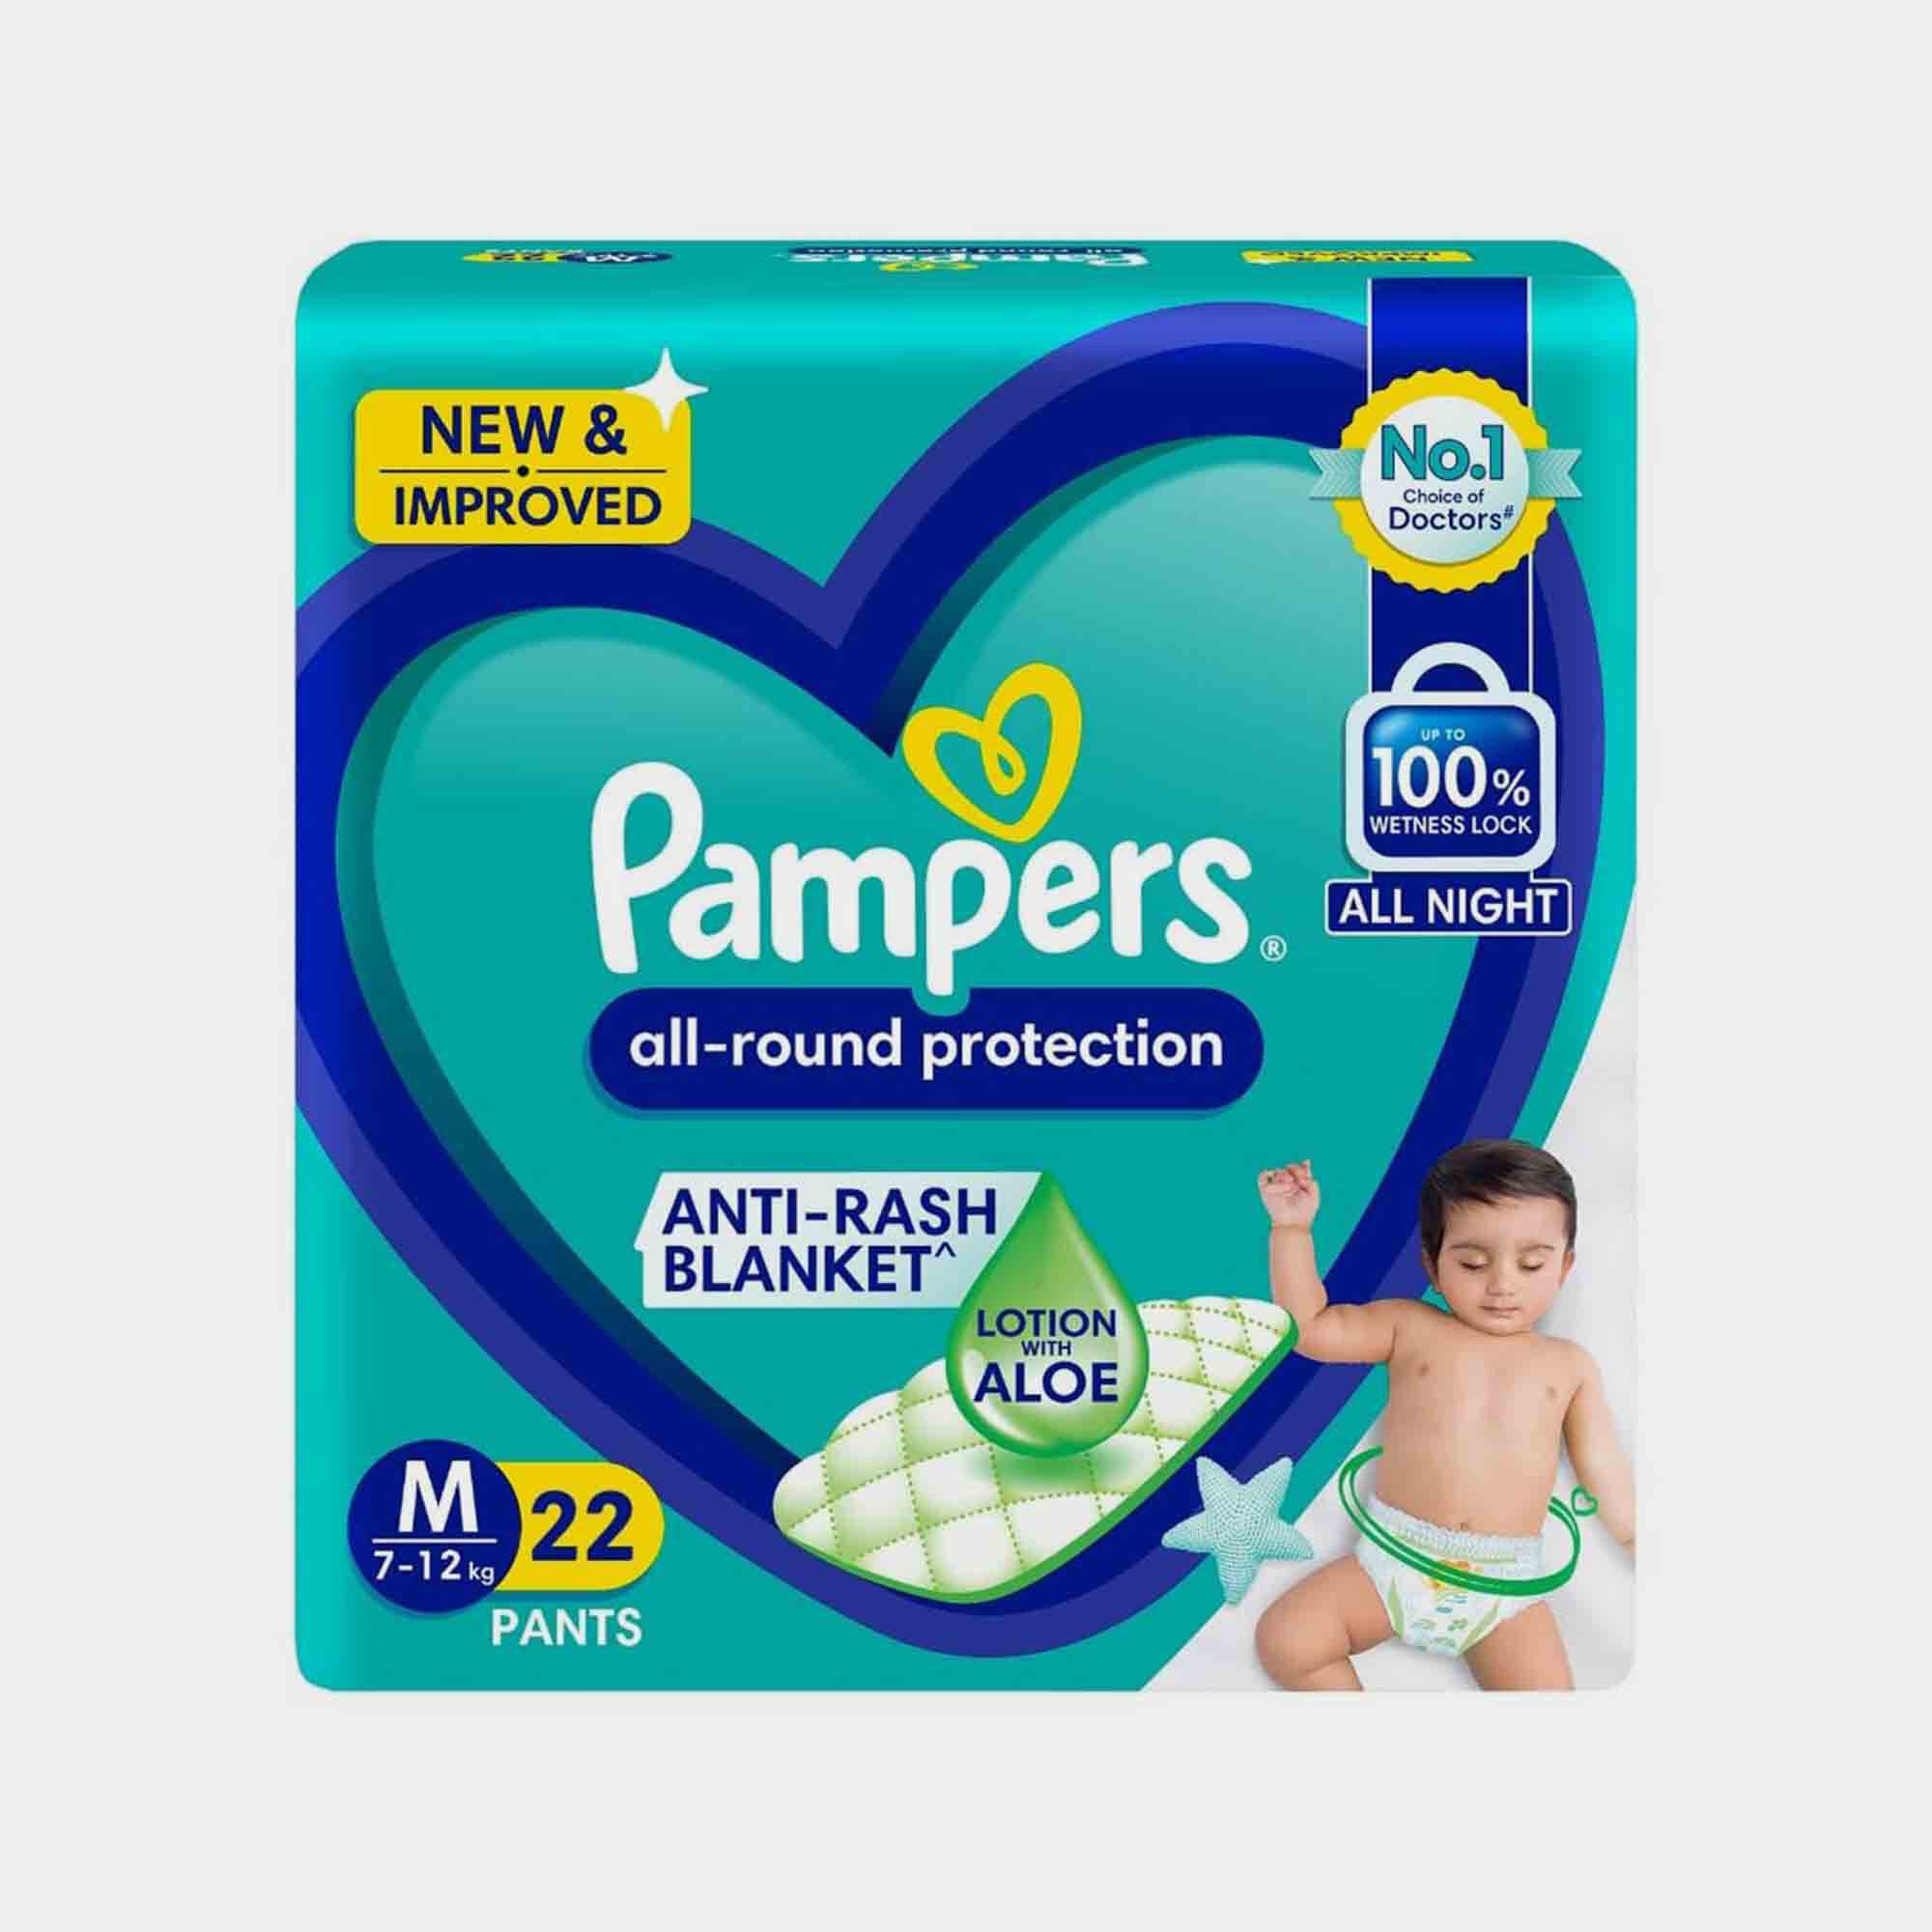 Pampers Active baby diapers - Product review - Hellomomy